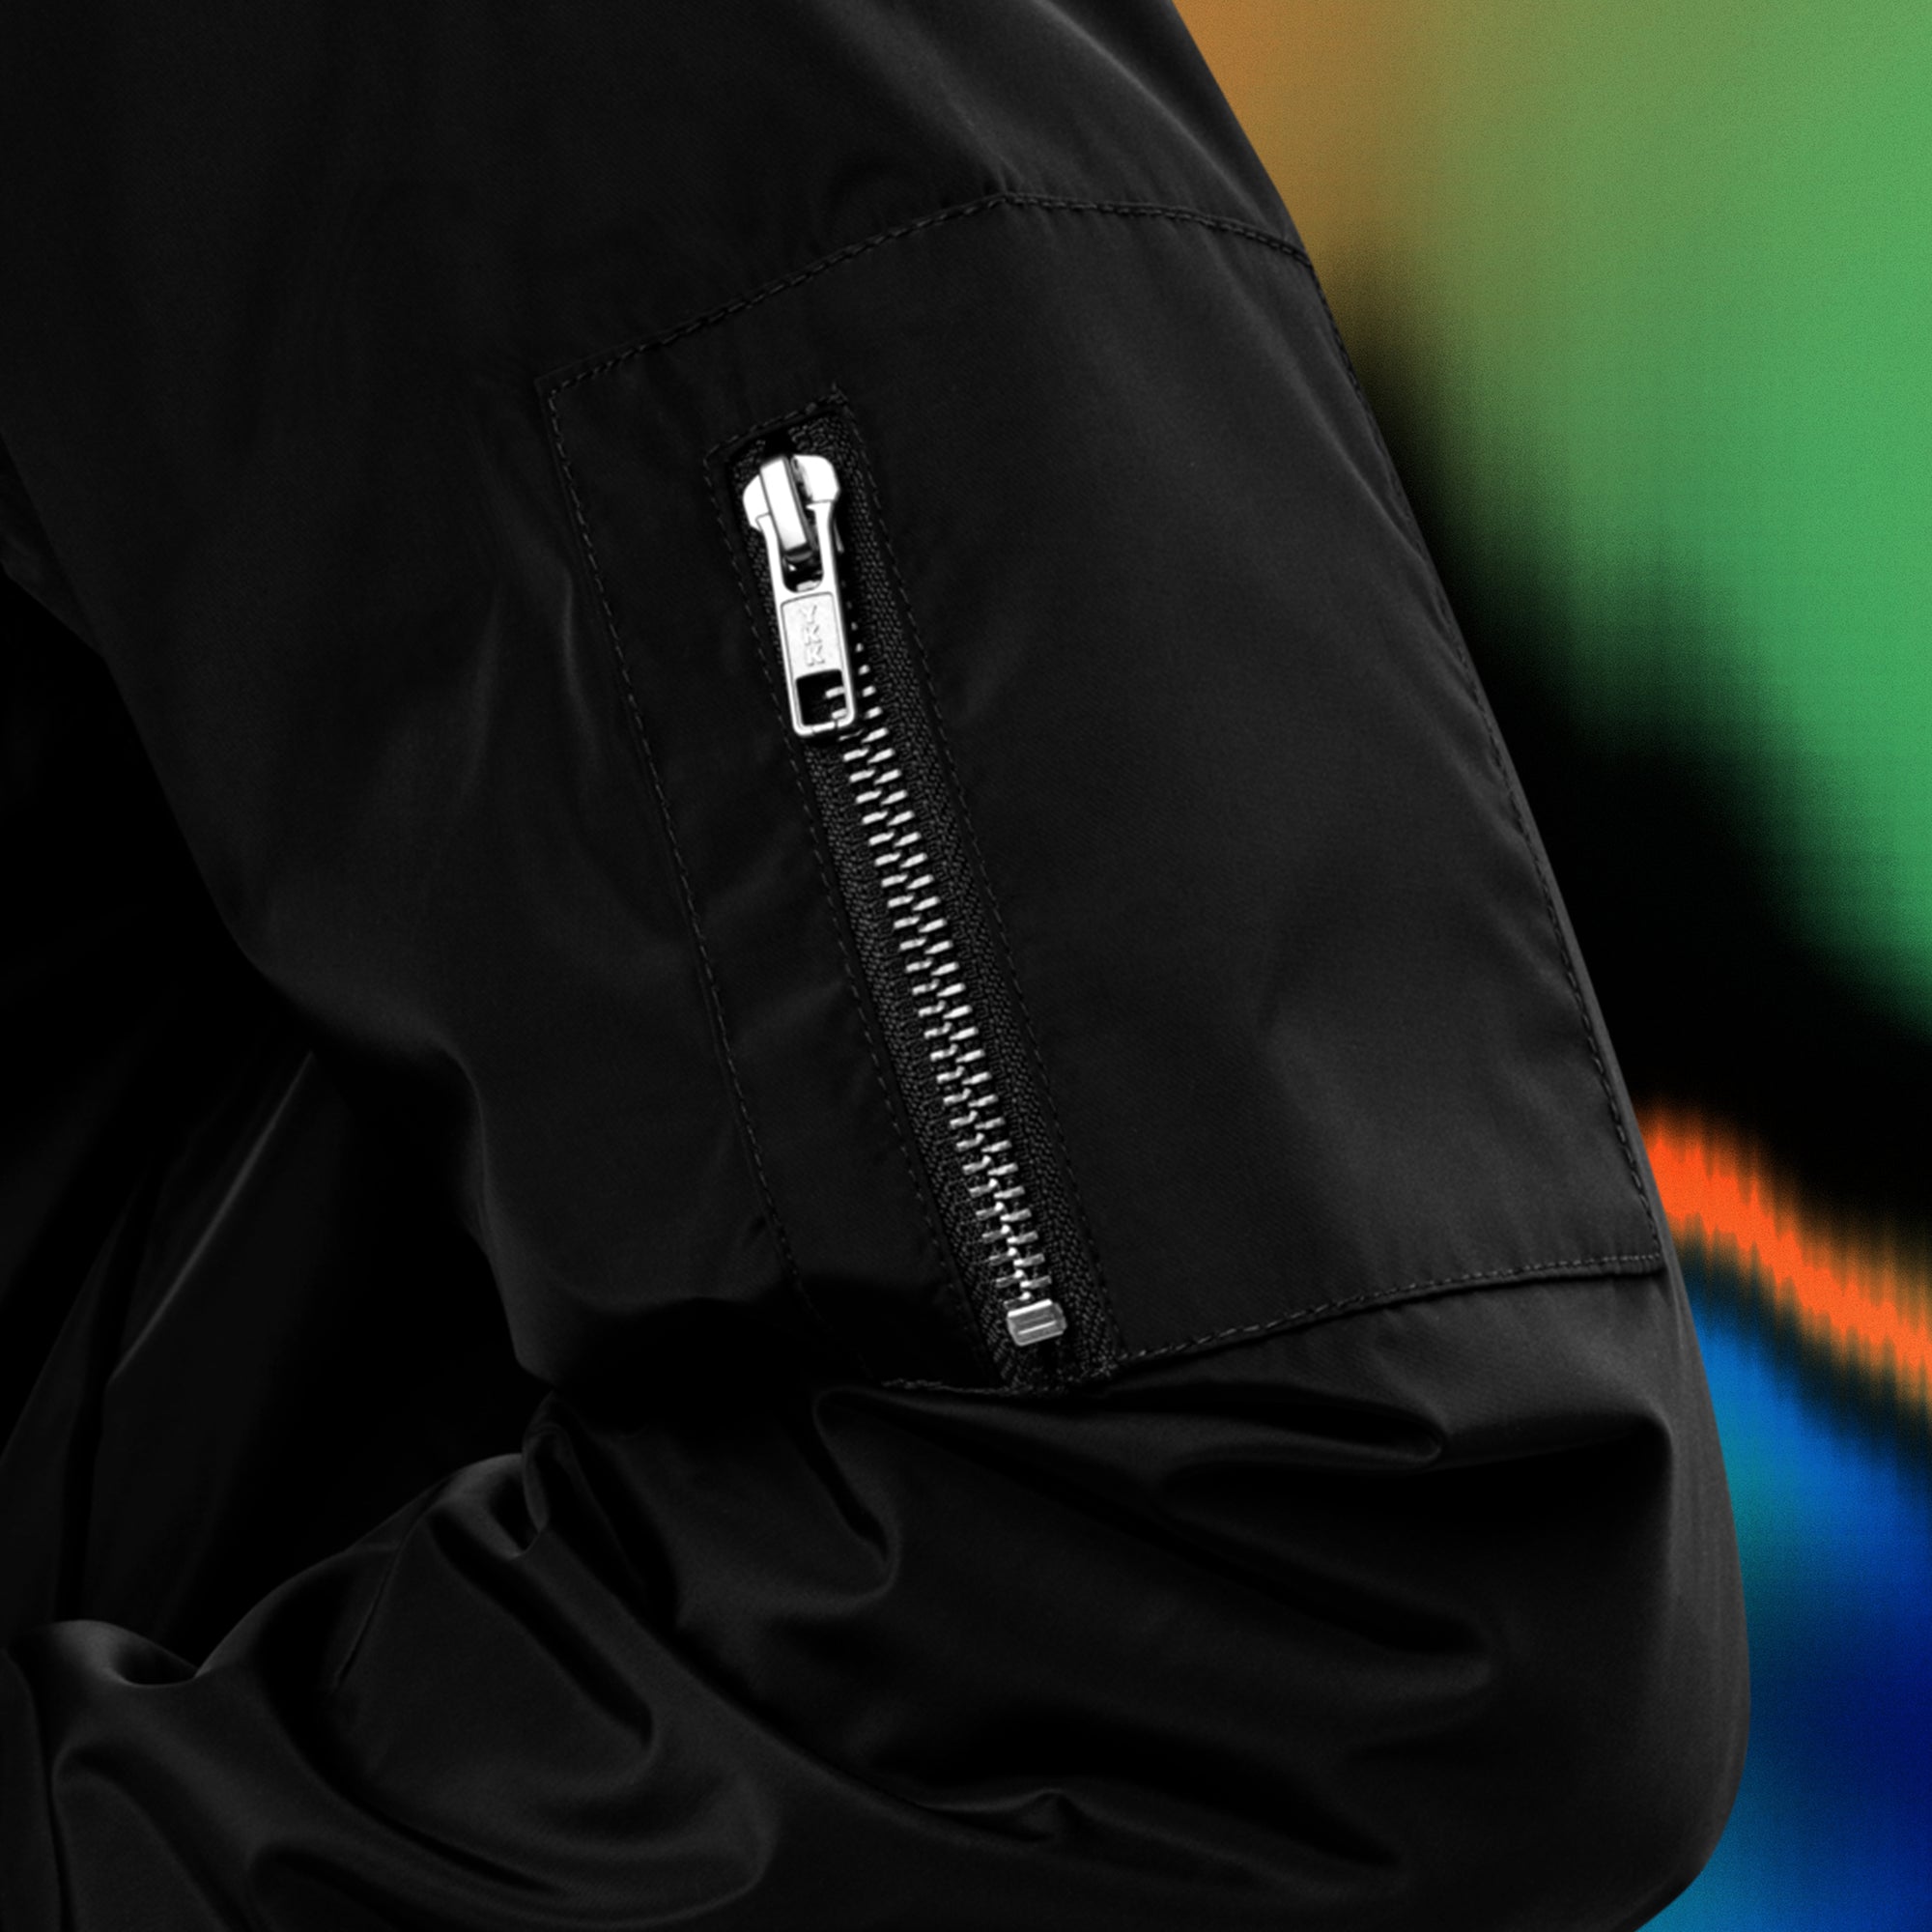 Bitcoin Bull Bomber Jacket - Close up view of utility pocket. Available at NEONCRYPTO STORE.